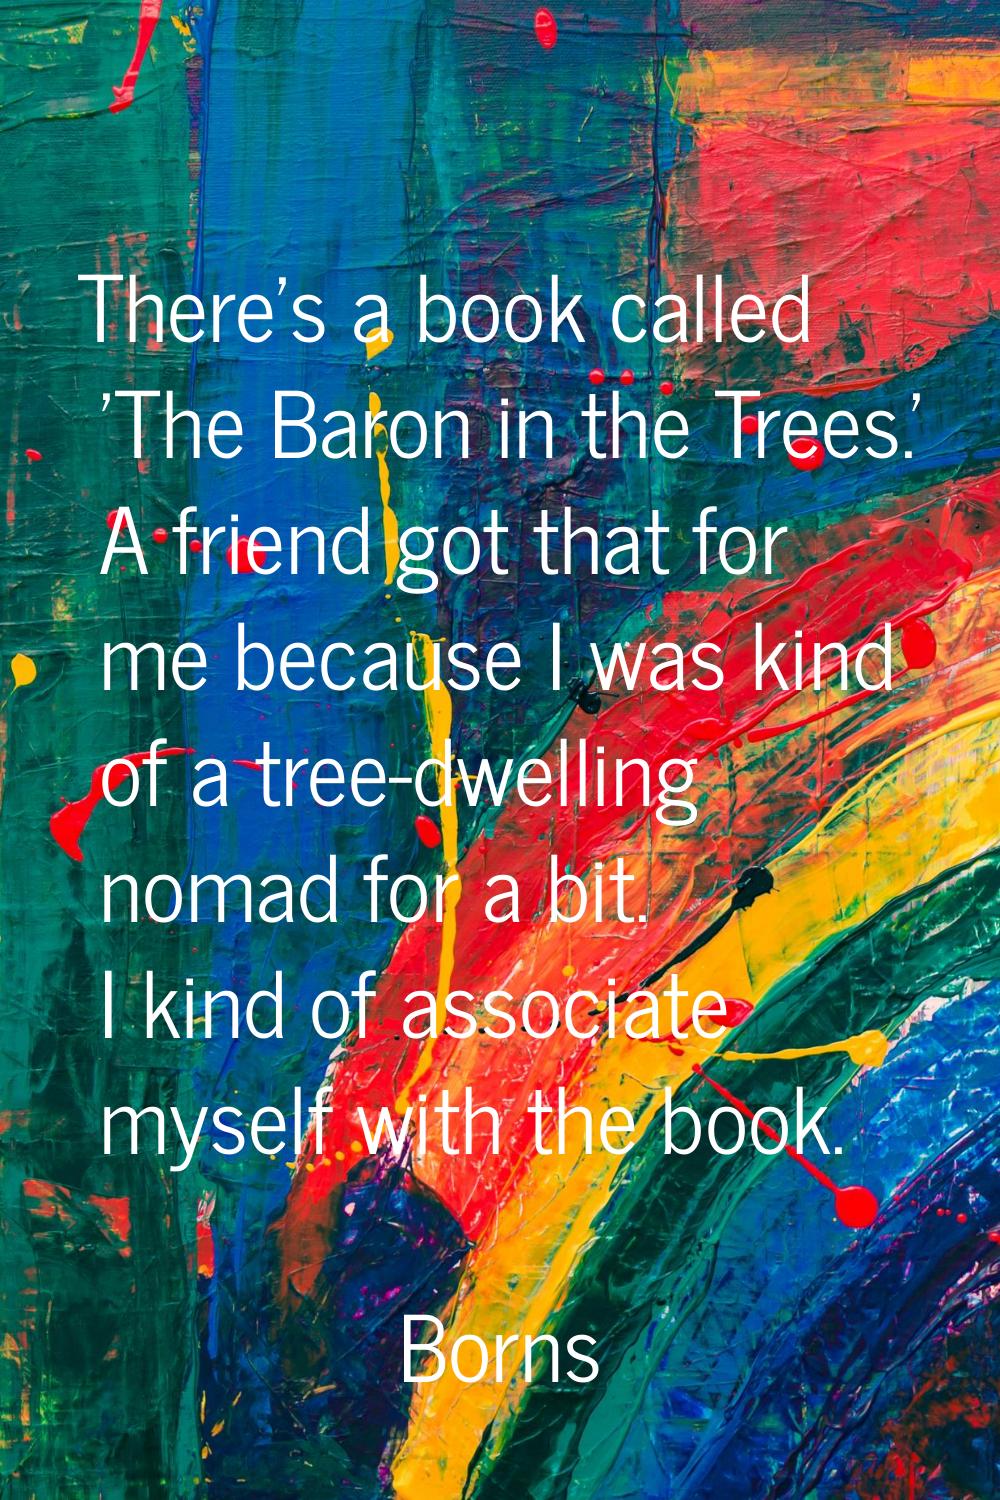 There's a book called 'The Baron in the Trees.' A friend got that for me because I was kind of a tr